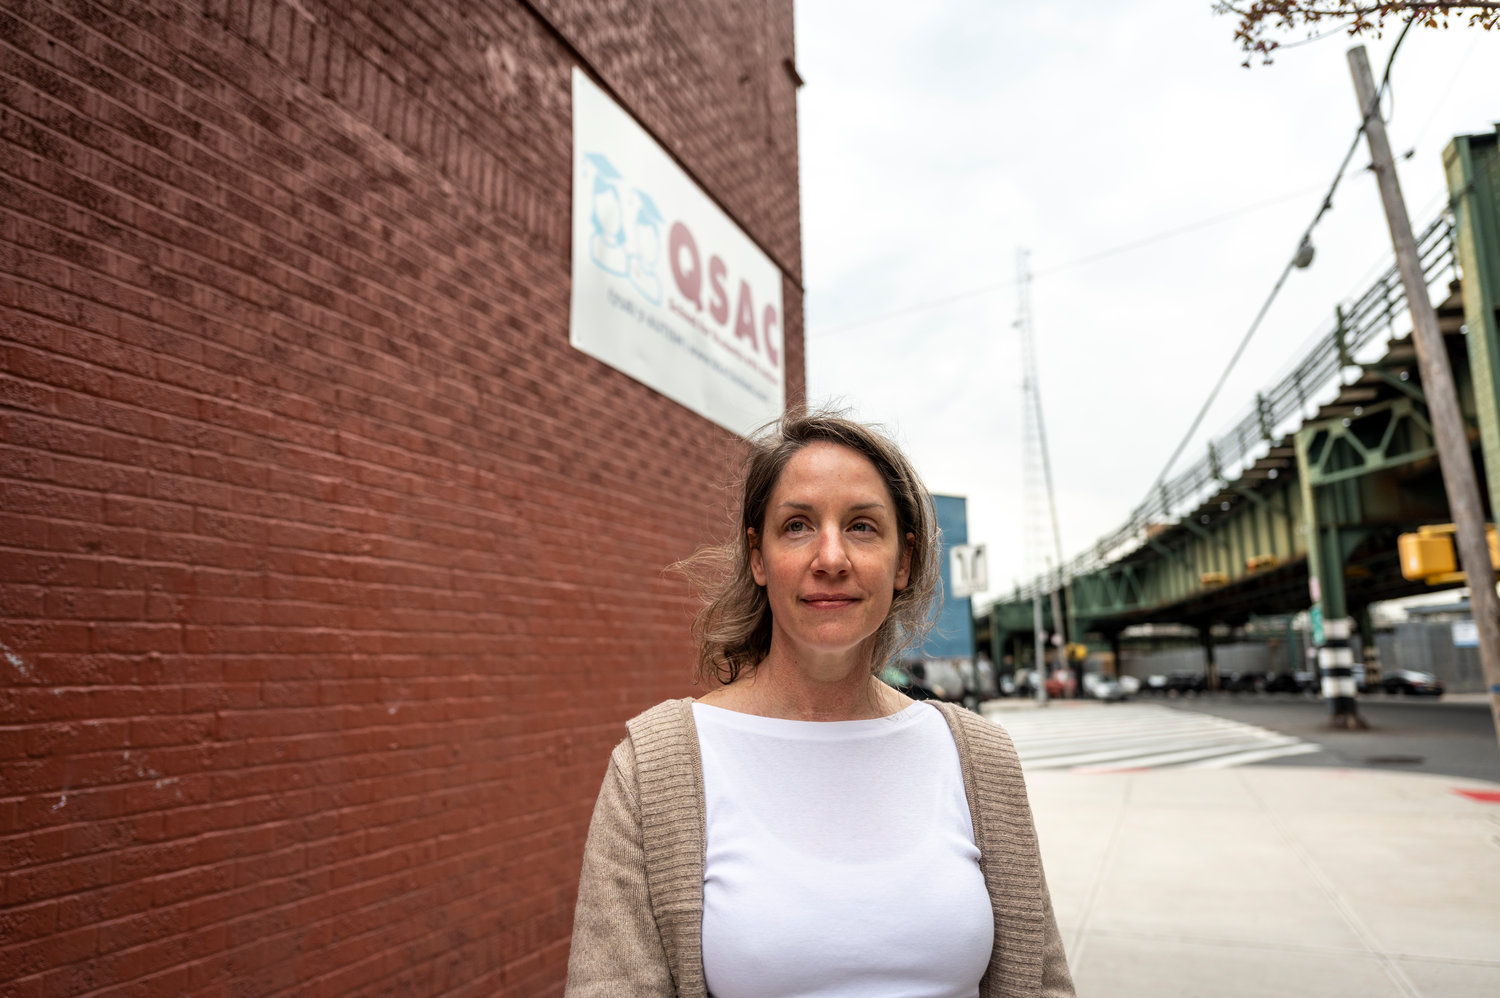 To Susan Silvestri, director of QSAC School for Students with Autism in the Bronx, autism advocacy goes beyond students, needing to represent teachers as well. Access to necessary resources isn’t as easy for QSAC as it might be for public schools.